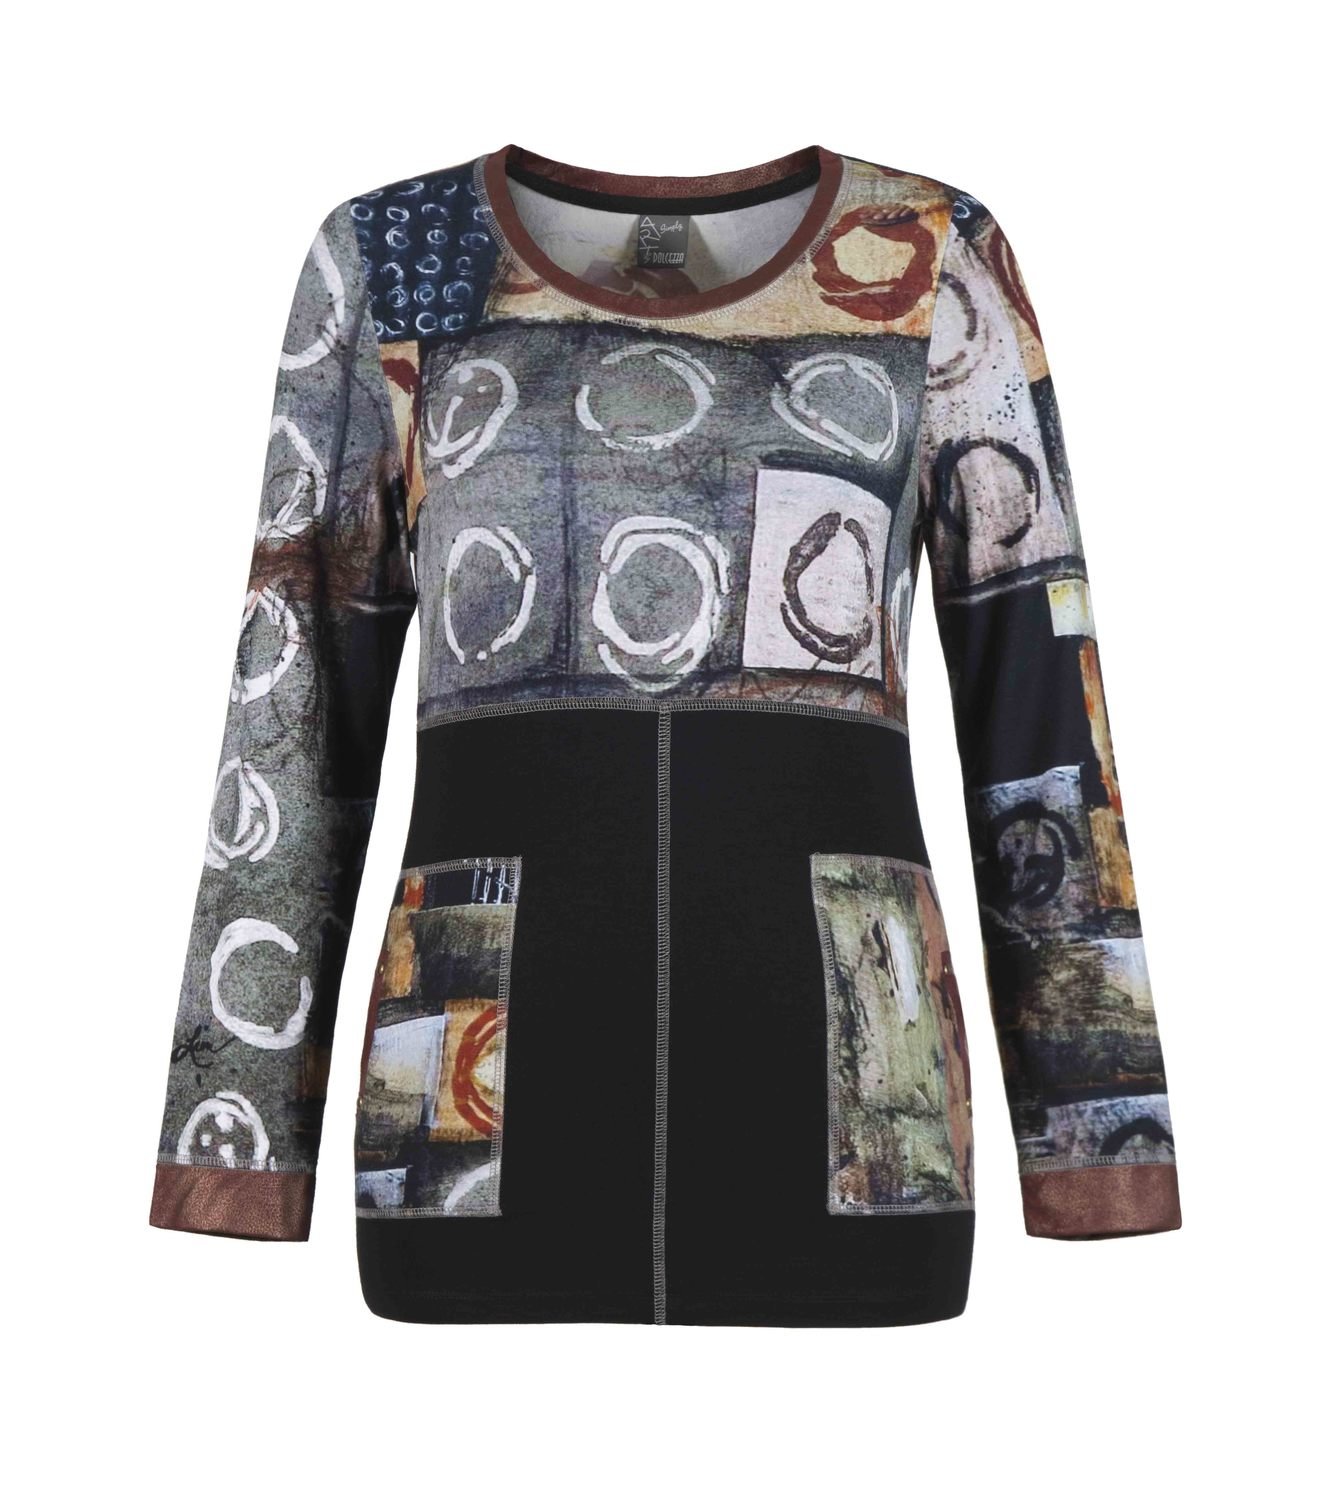 Simply Art Dolcezza: Exotic Truffle Collection Abstract Flutter Tunic (1 Left!)